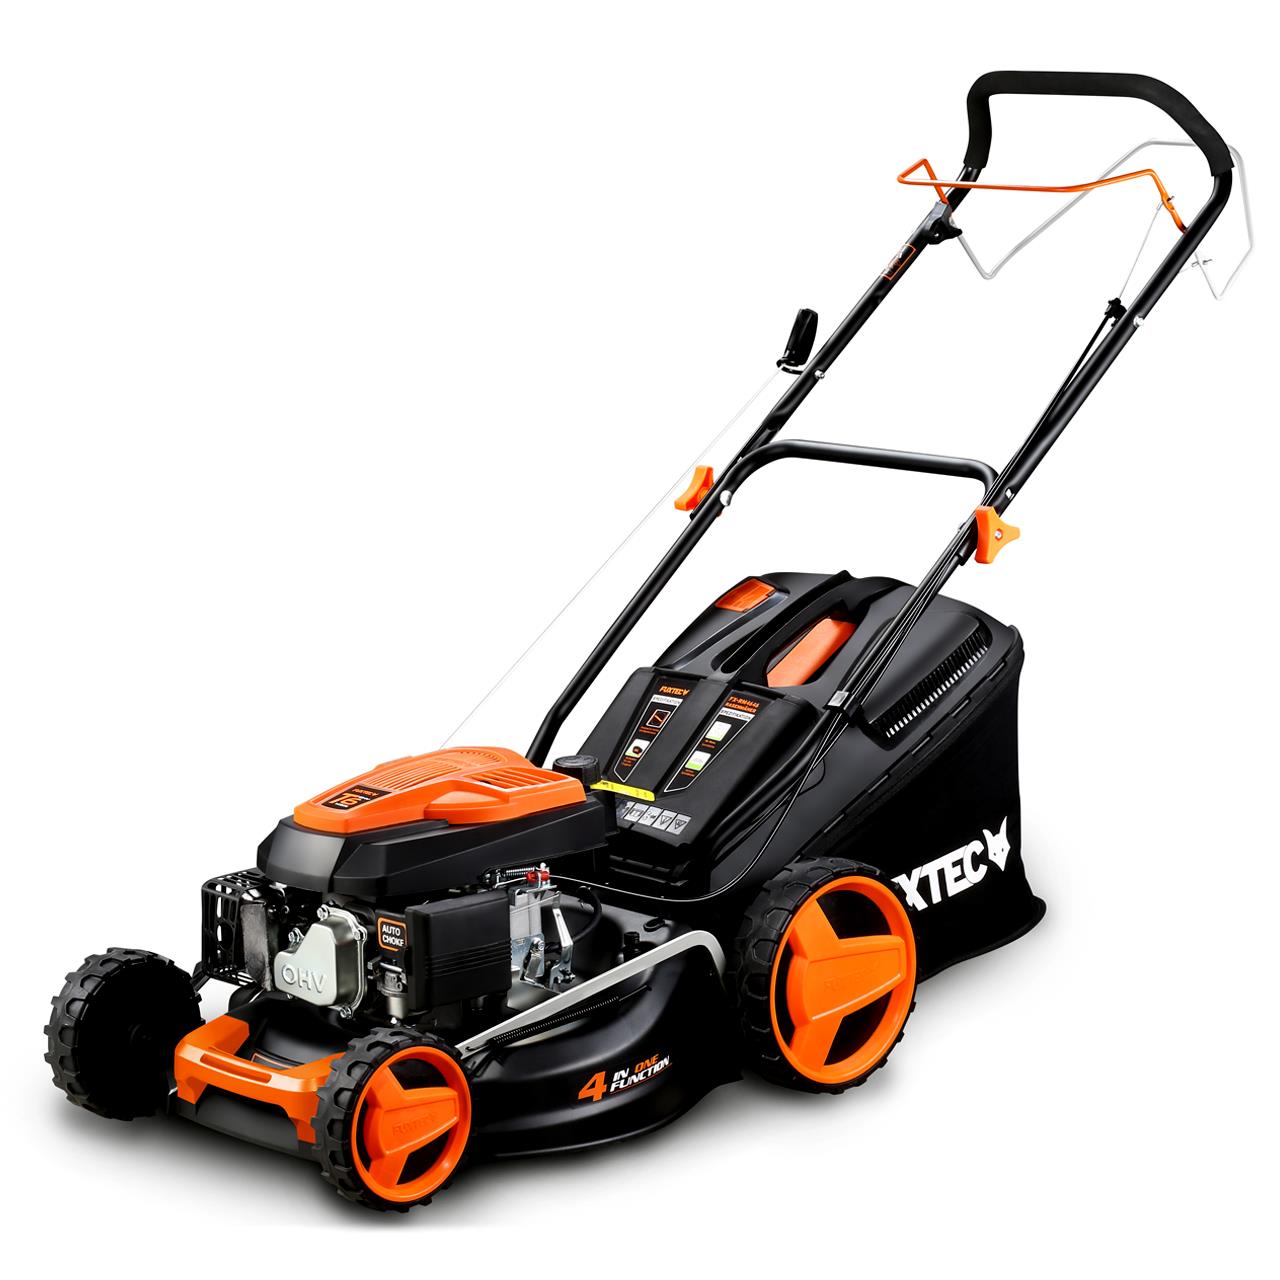 Petrol 146cc lawnmower 18inch cutting width -mowing,collecting,mulching,side discharge- FUXTEC RM4646